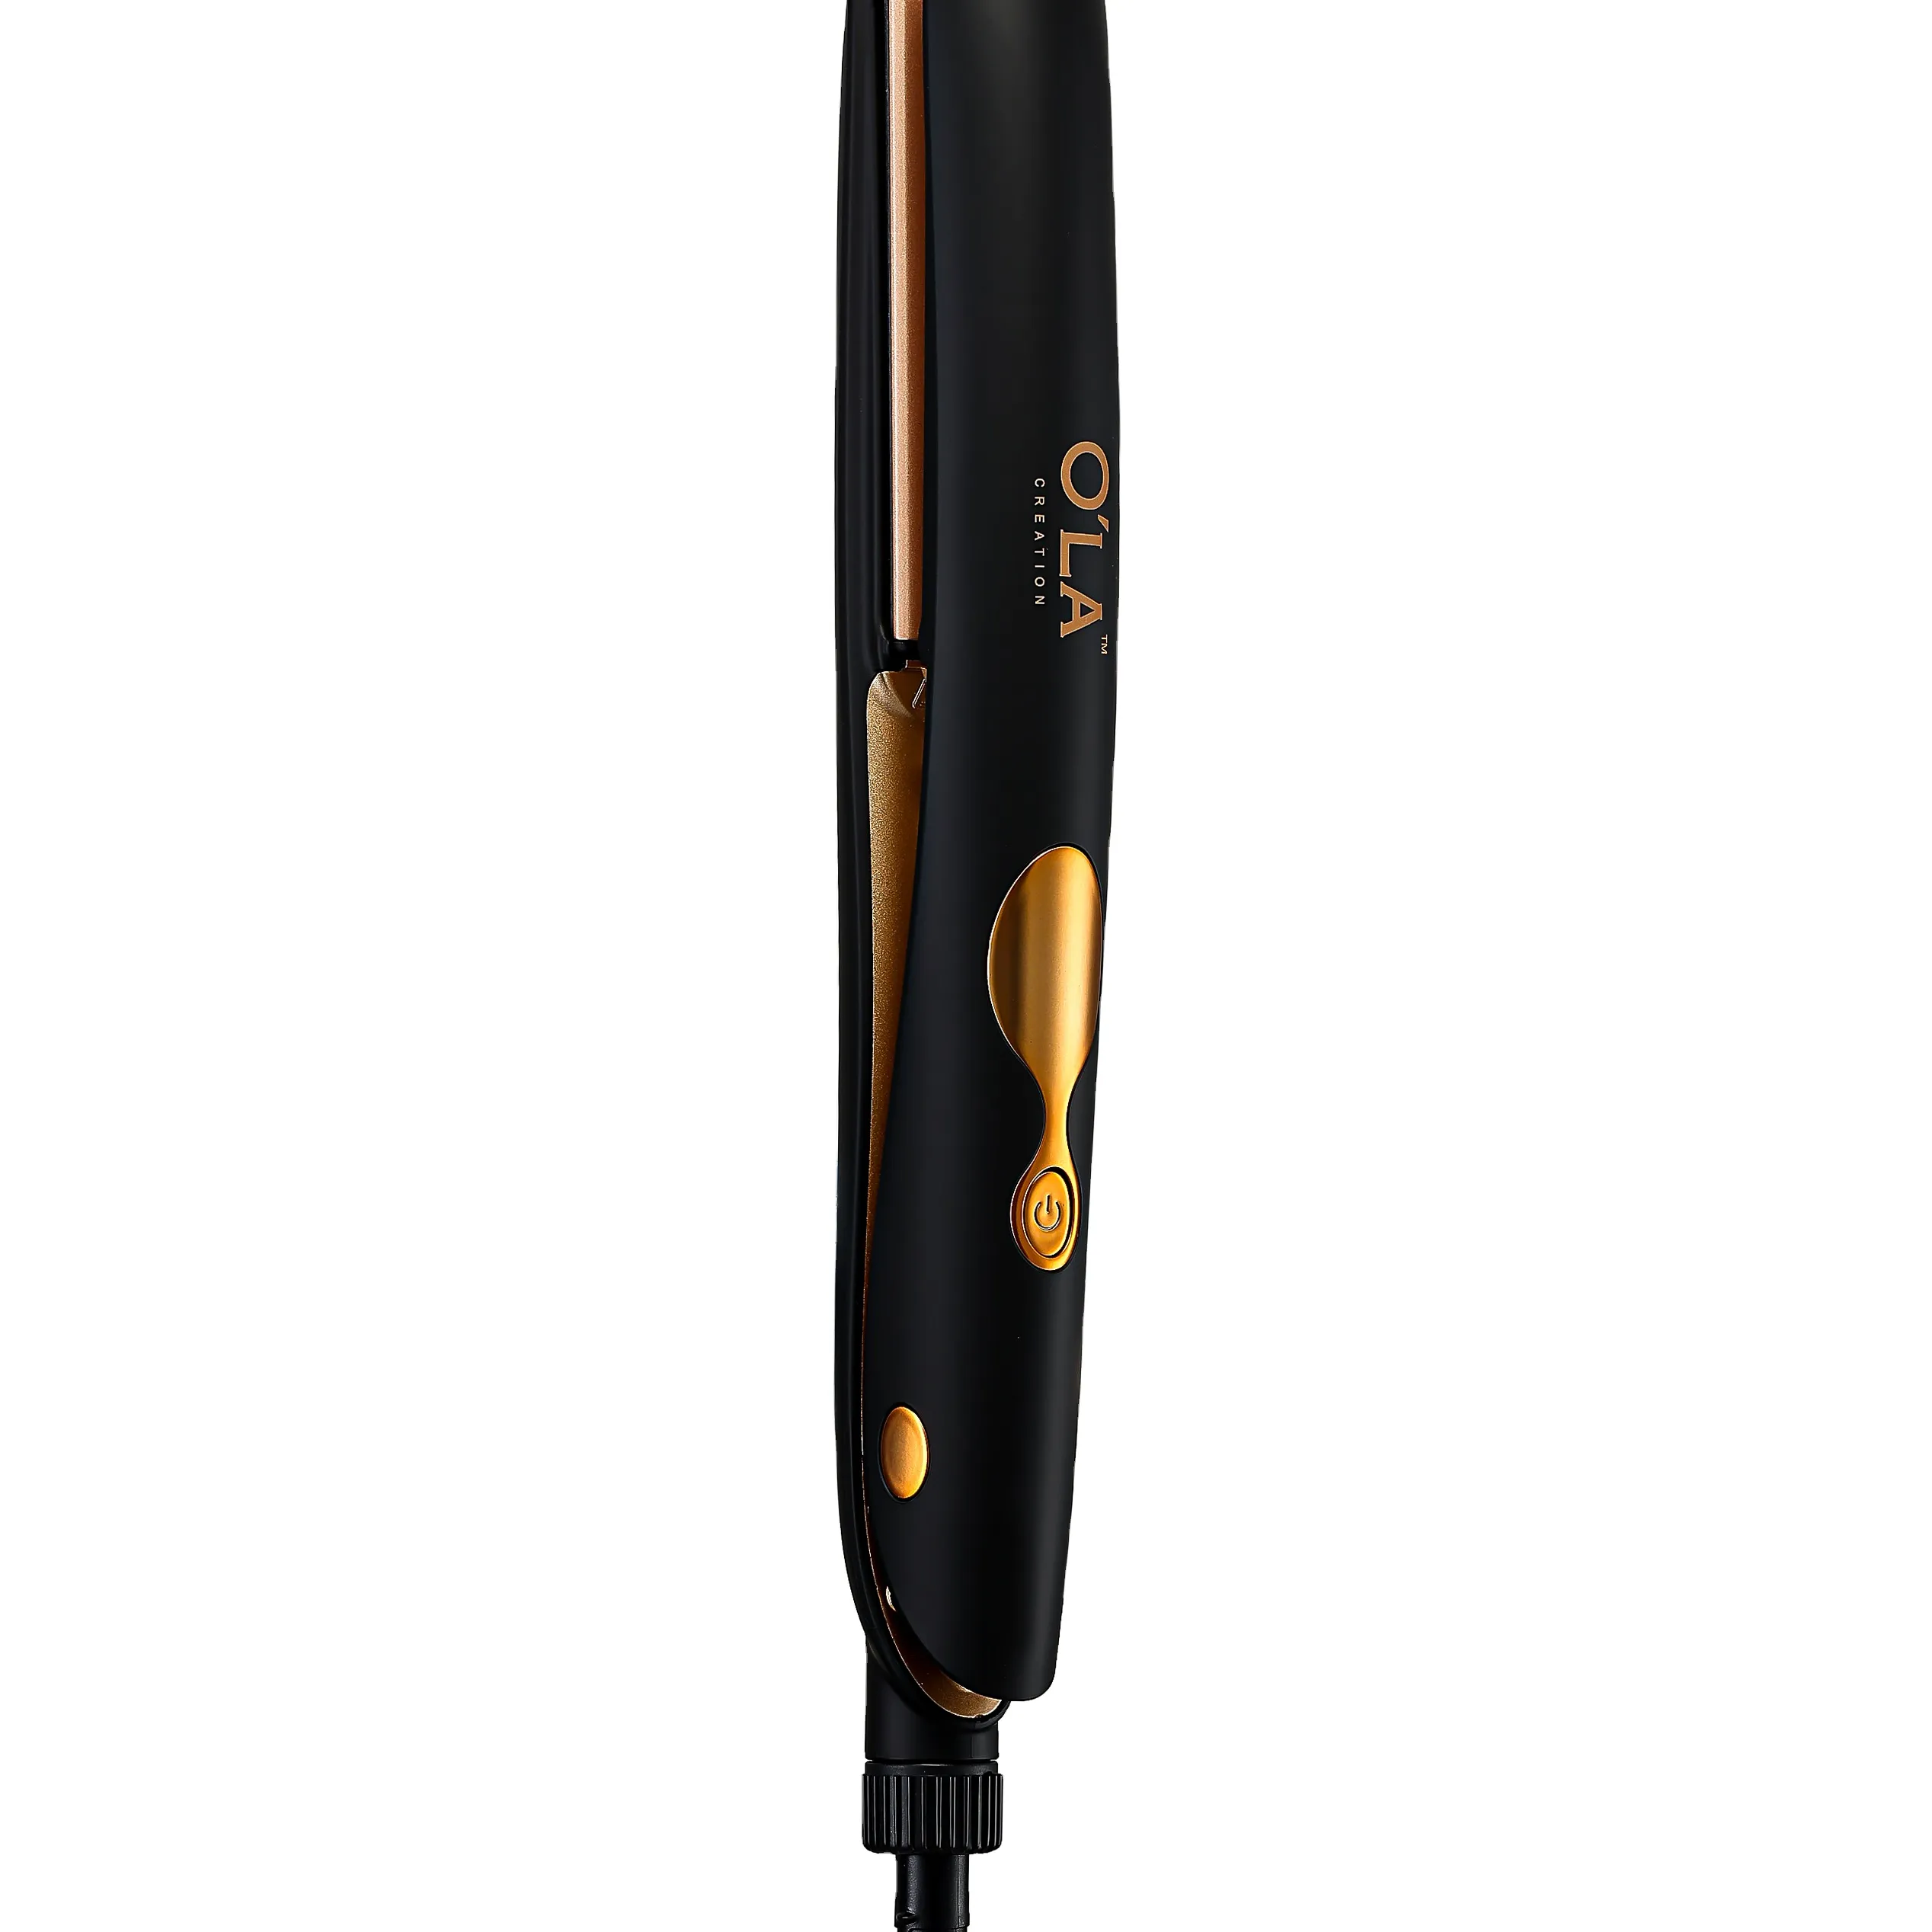 O'LA Professional Ceramic hair iron straightener with LED flat irons wholesale private label customize hair straightener